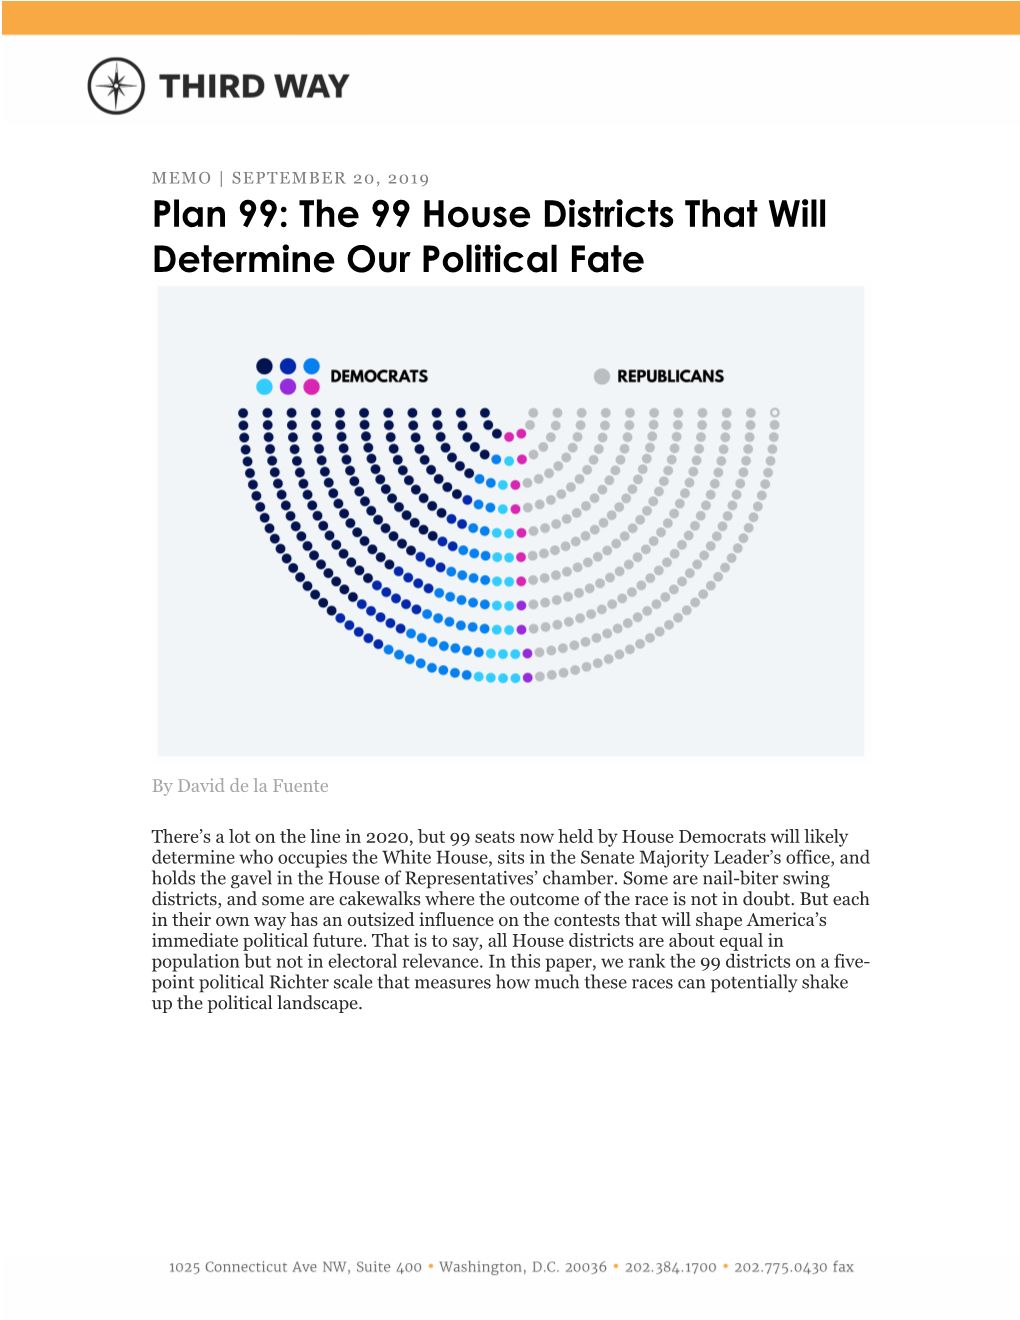 The 99 House Districts That Will Determine Our Political Fate